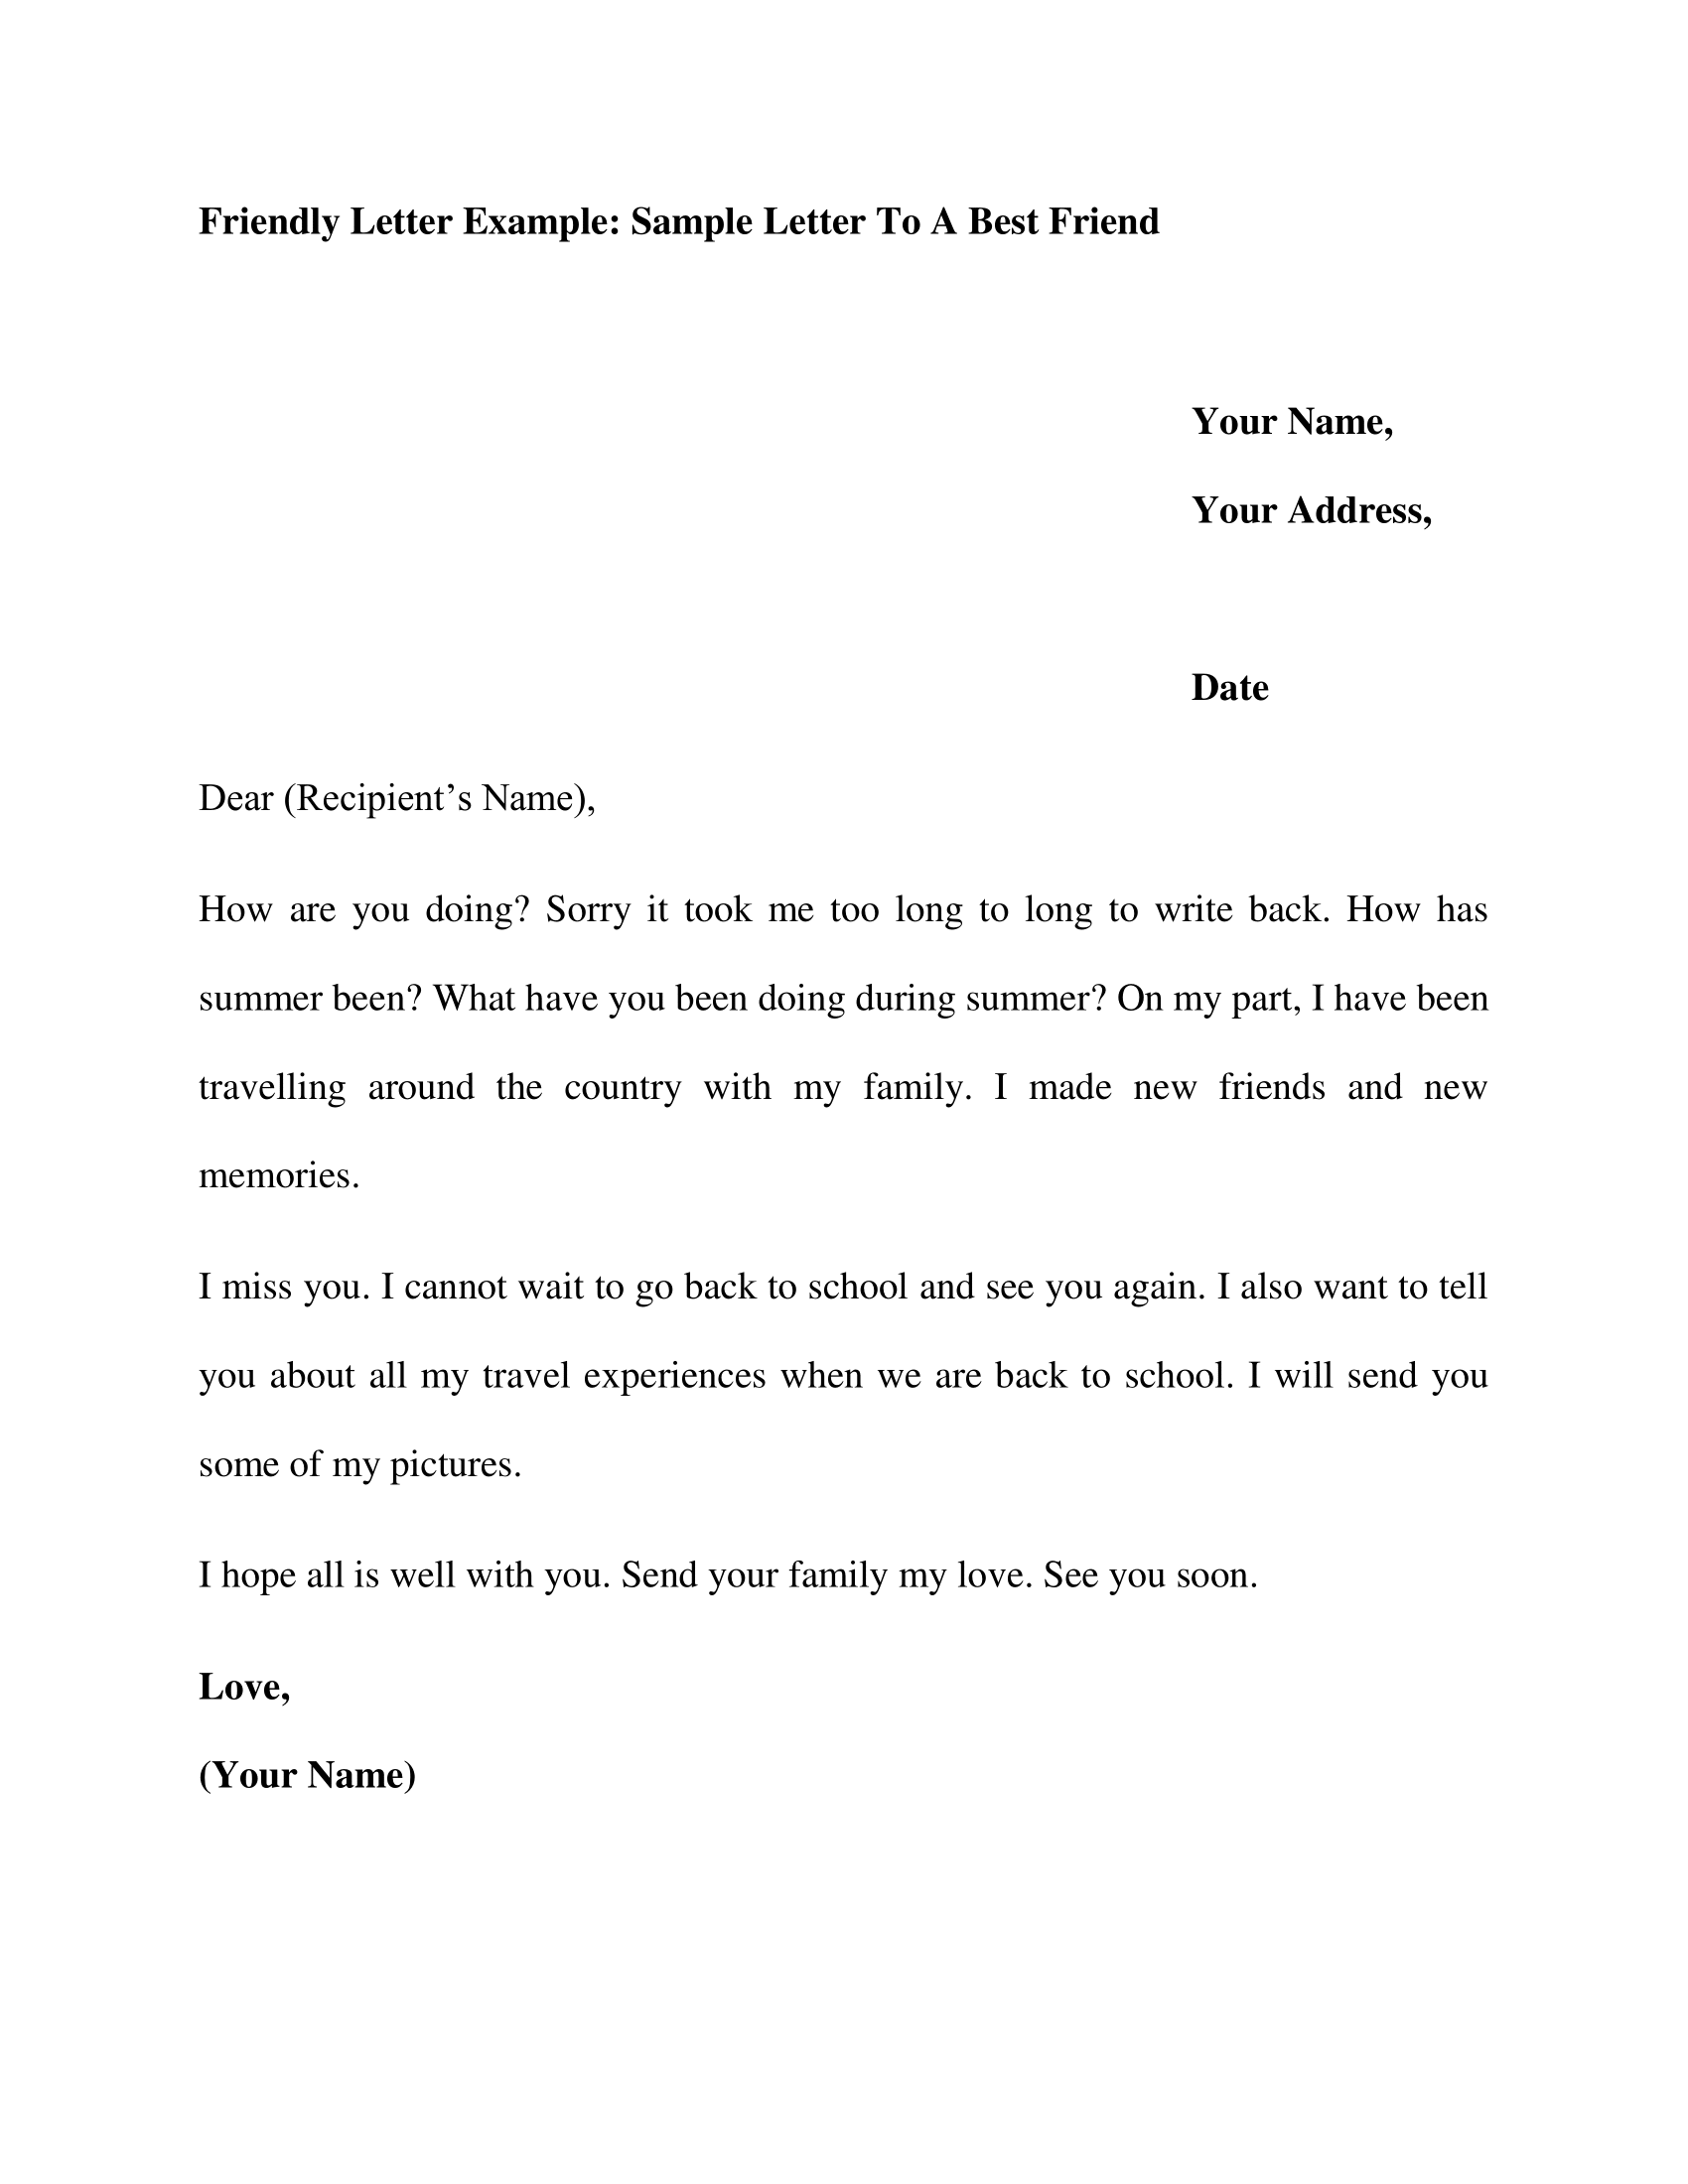 Friendly Letter Example Sample Letter To A Best Friend Iwriteessays